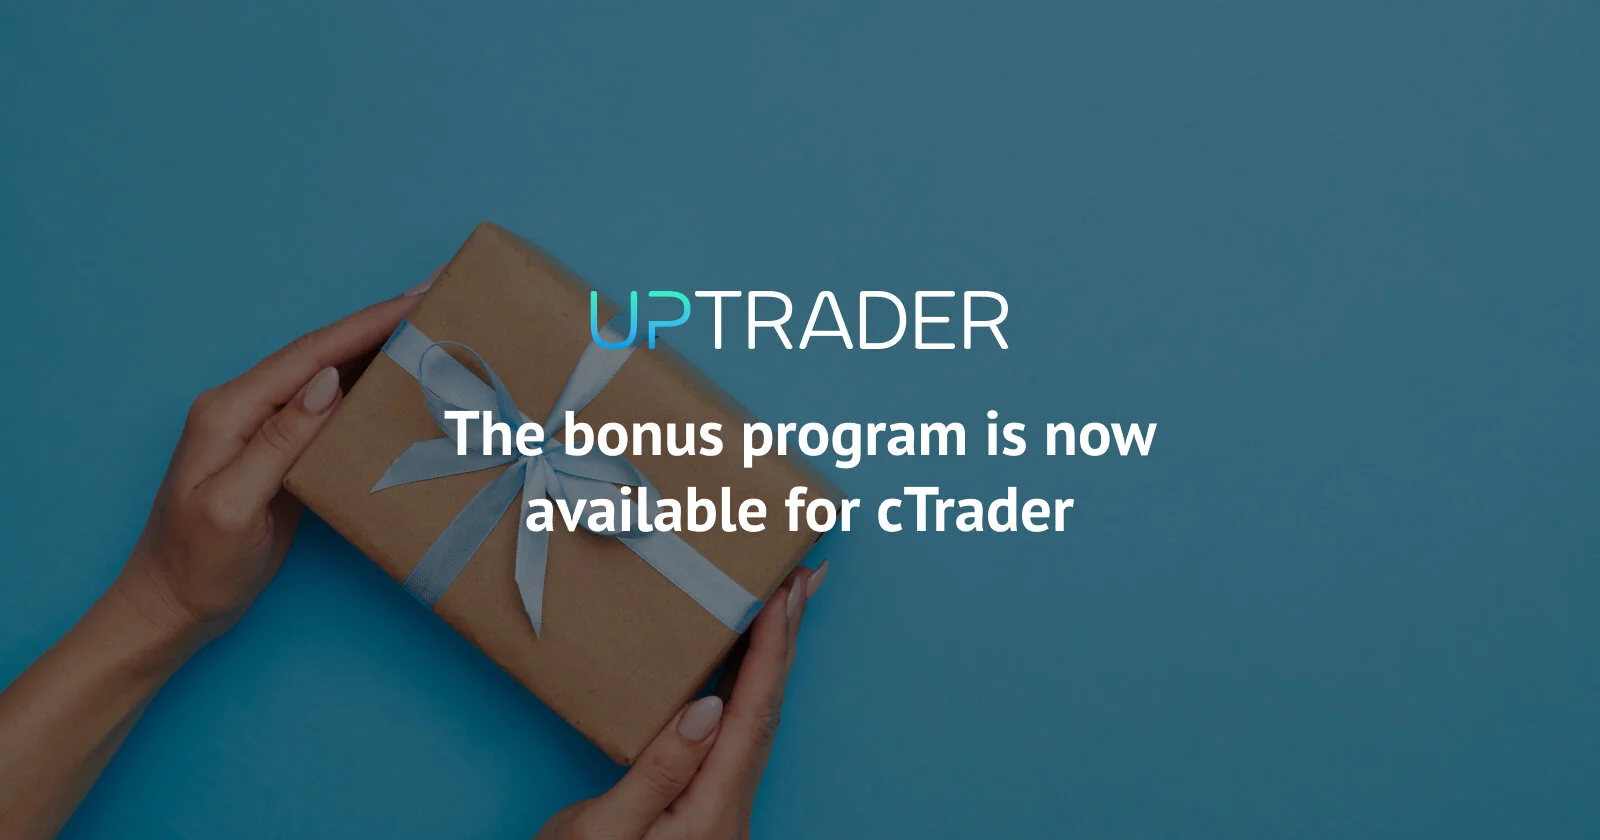 The bonus program is now available for cTrader